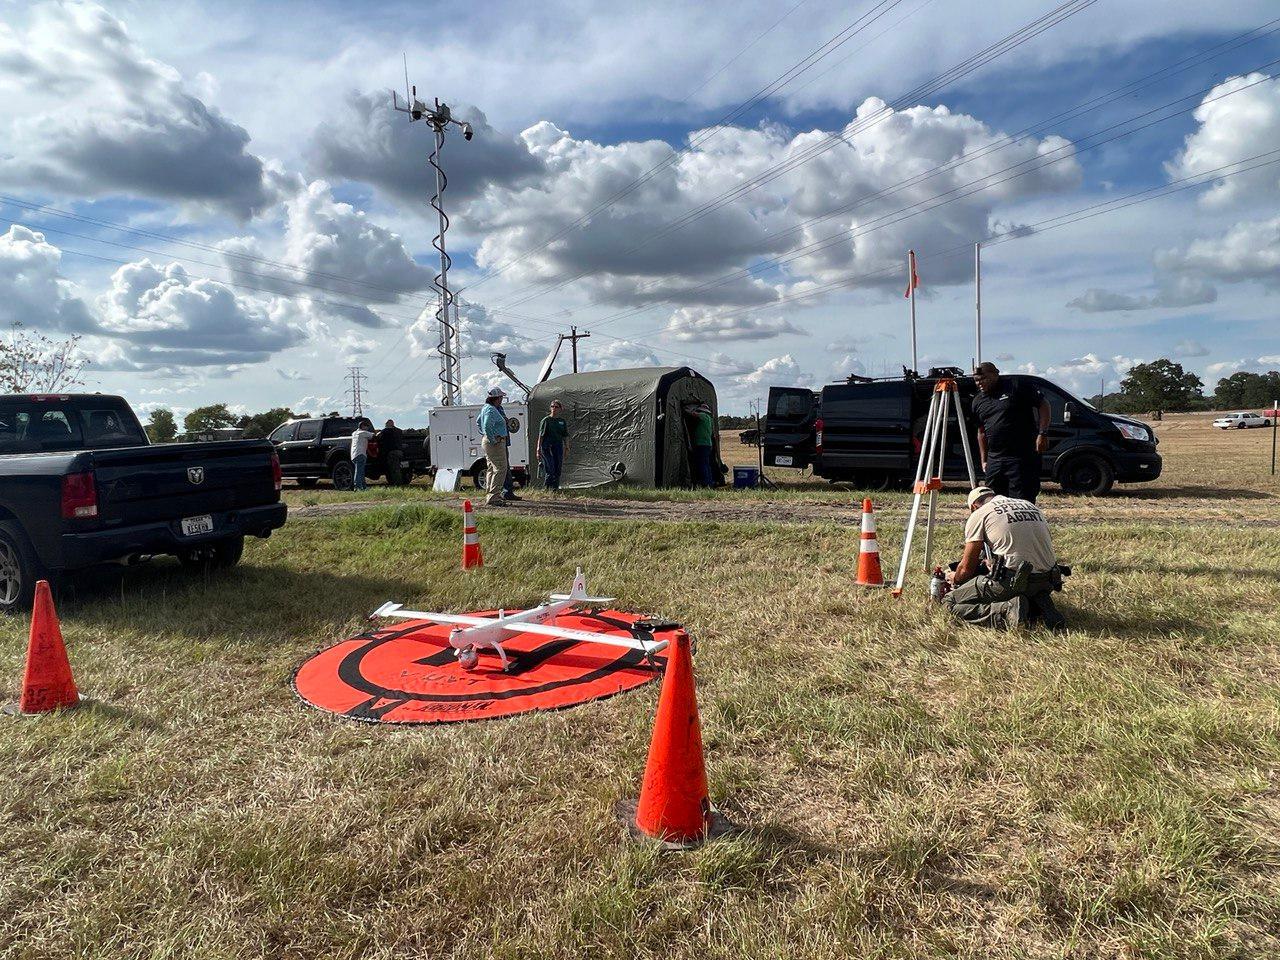 Multiple people working to set up equipment, tent, and drone launch pad to prepare for a recon flight.  Foreground has large, round orange mat on ground with a red and white drone set on top.